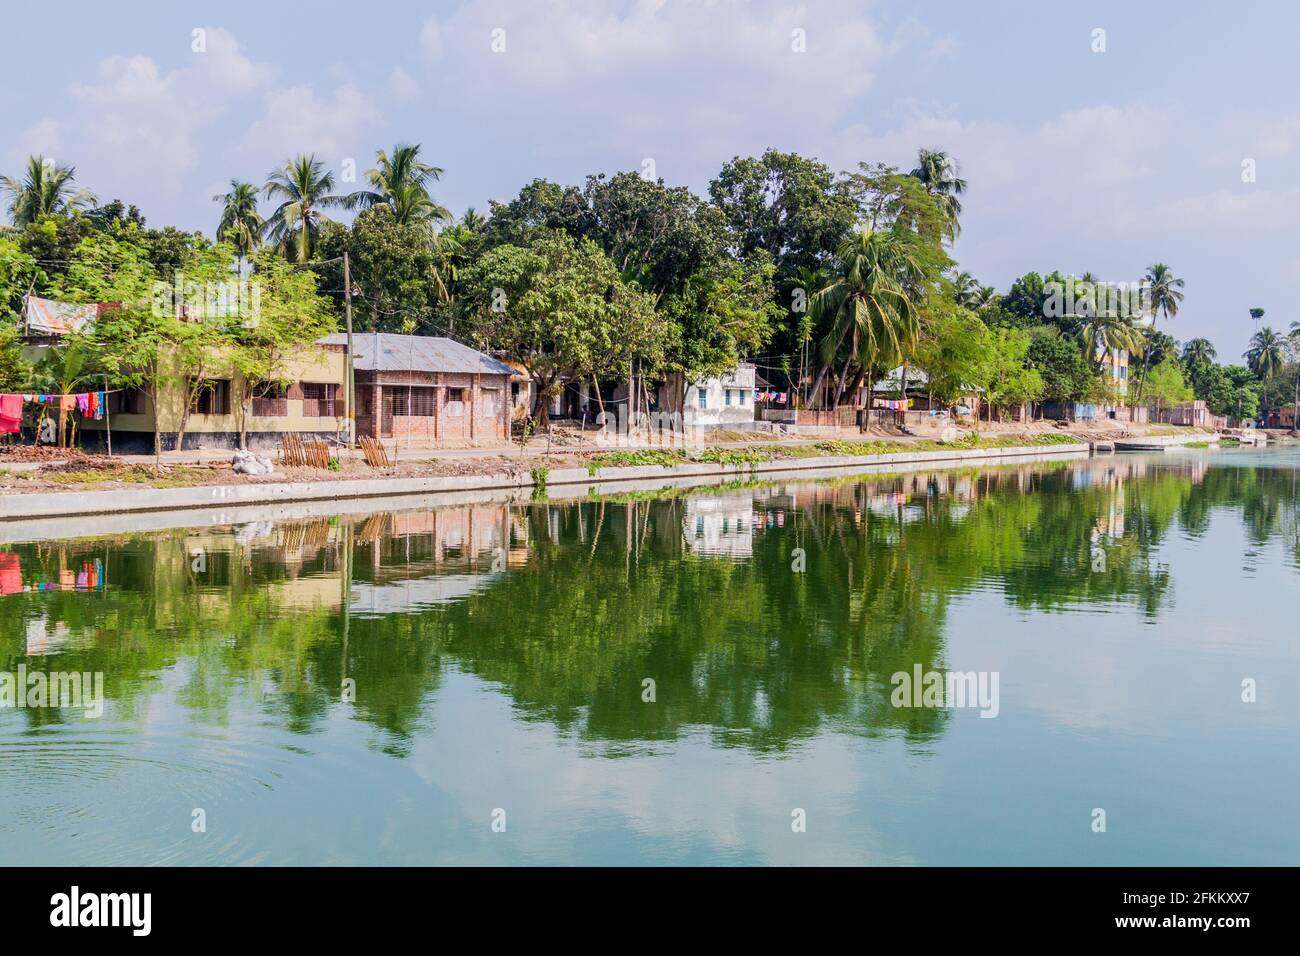 View of a pond in Puthia village, Bangladesh Stock Photo